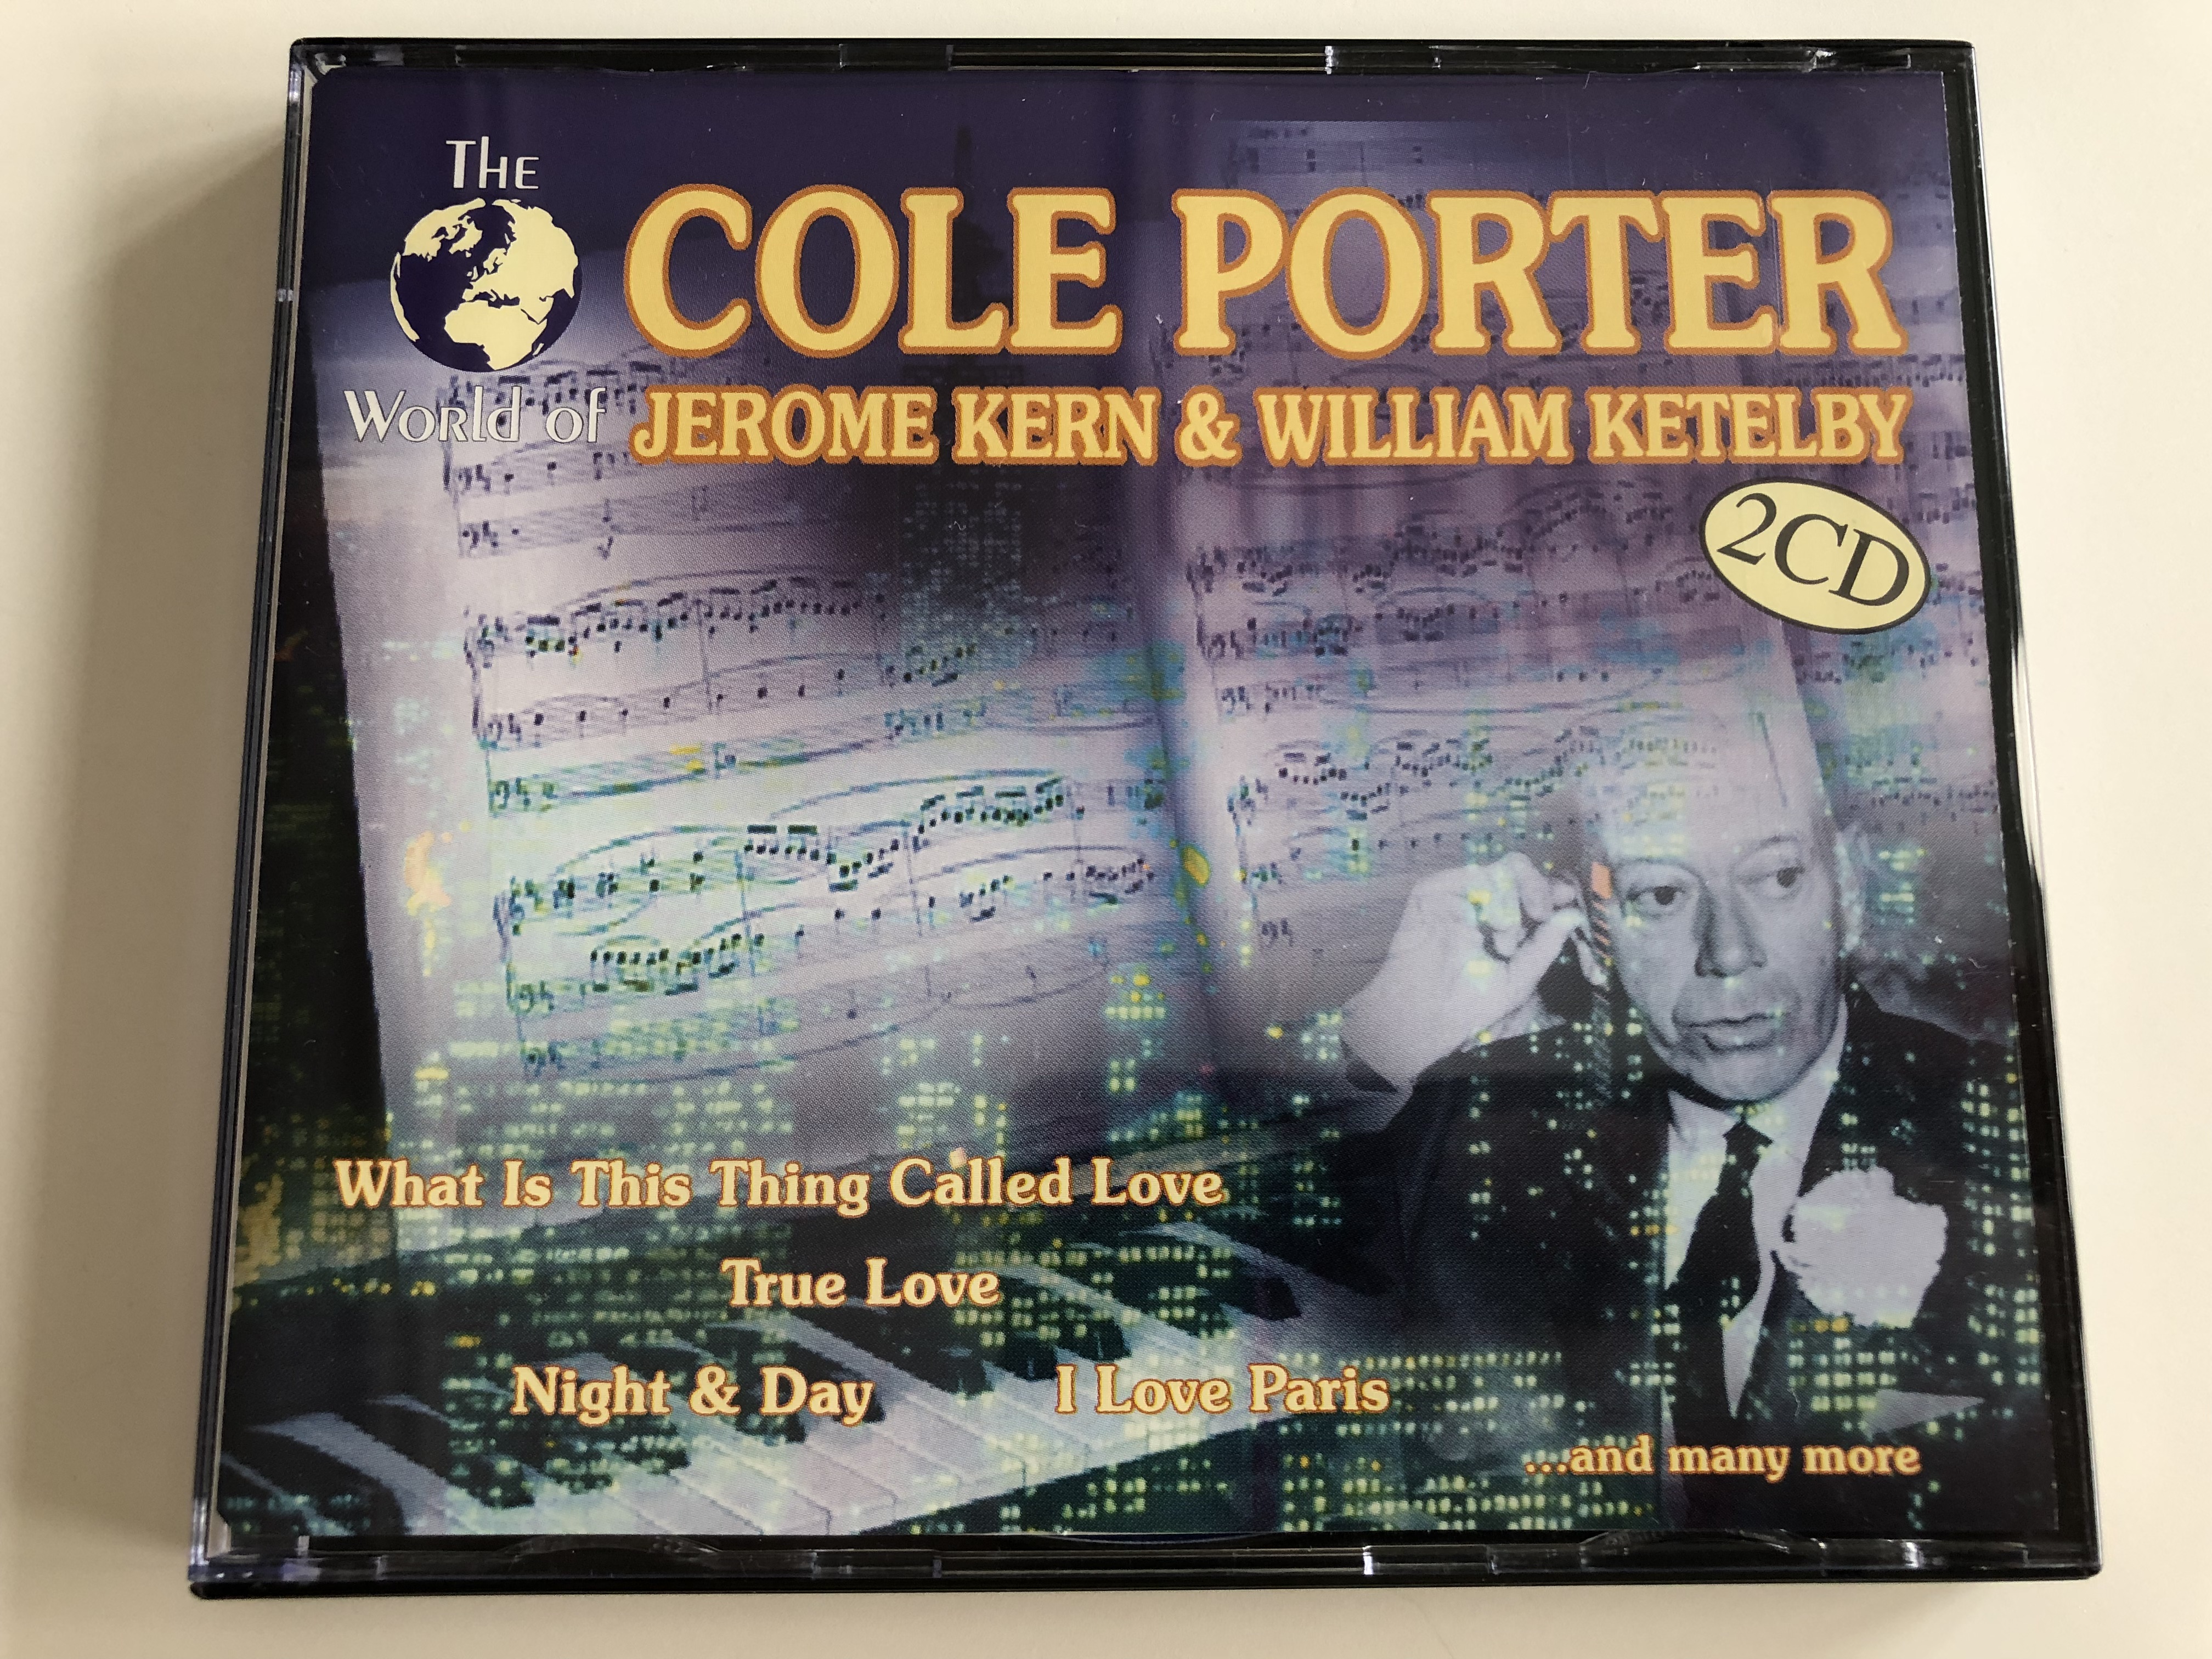 the-world-of-cole-porter-jerome-kern-william-ketelby-what-is-this-thing-called-love-true-love-night-day-i-love-paris-2-disc-audio-1998-zyx-11119-2-1-.jpg